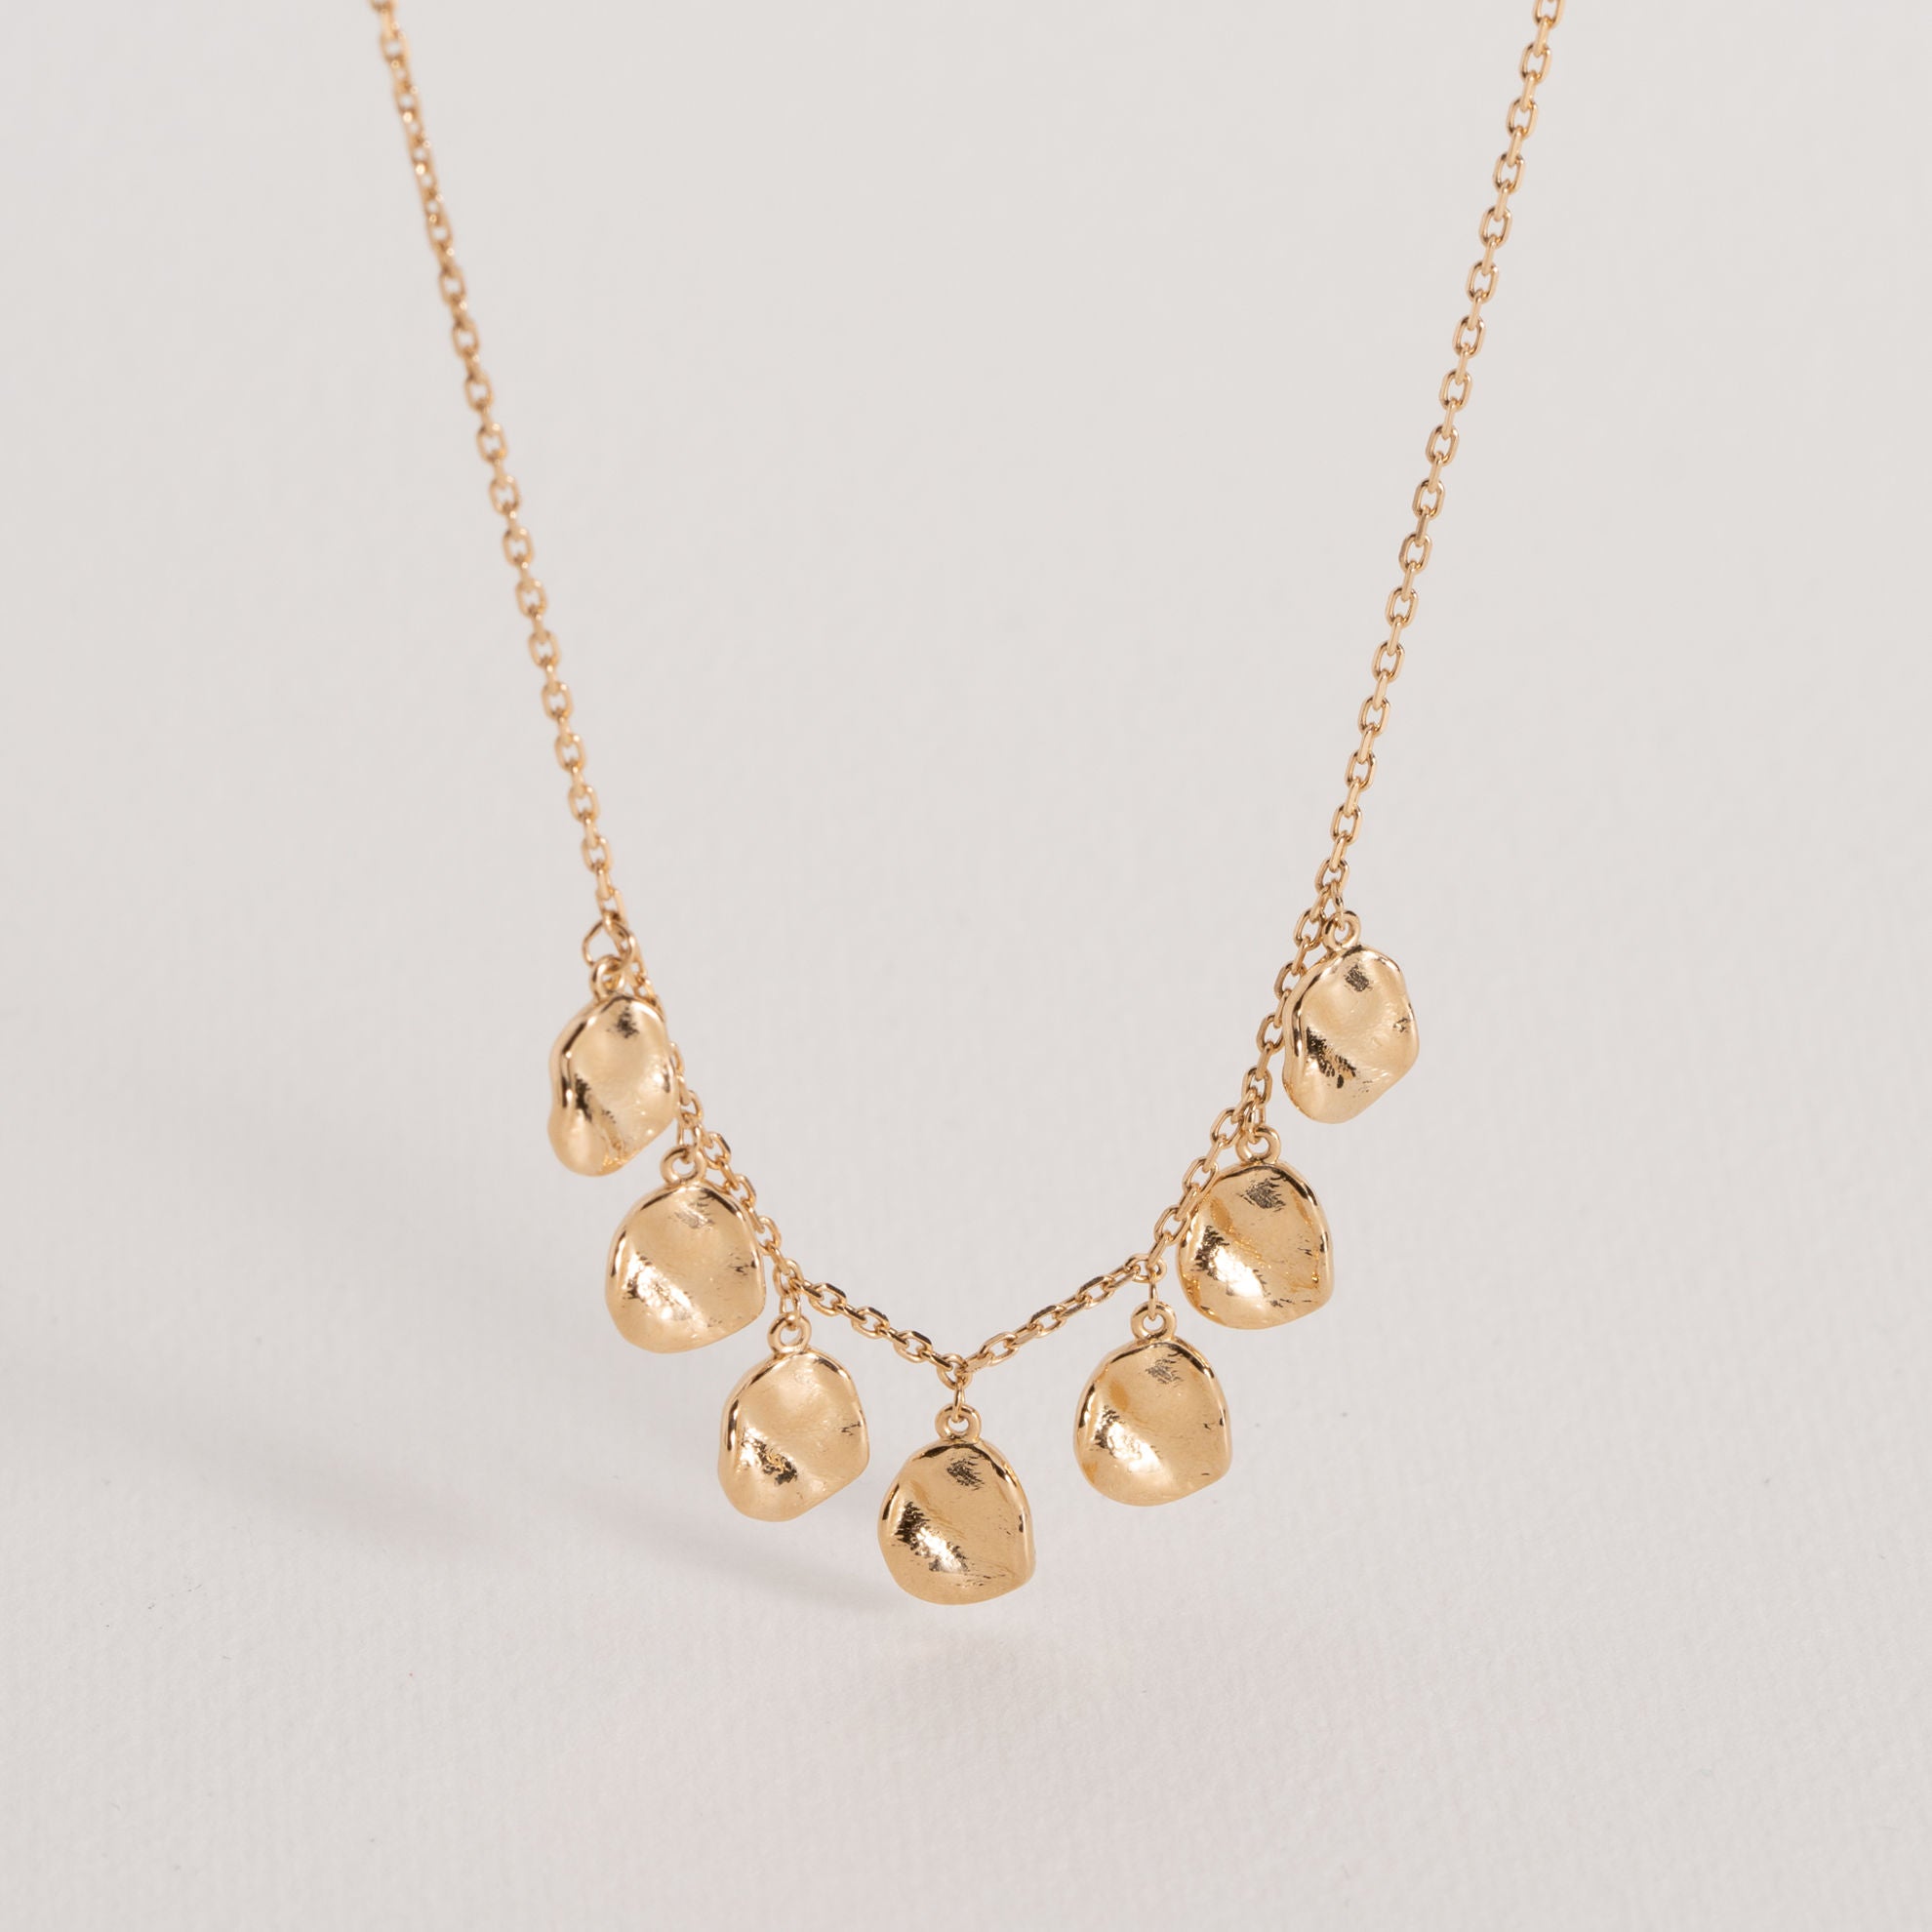 Suzette - Gold Plated Necklace - Ana et Cha